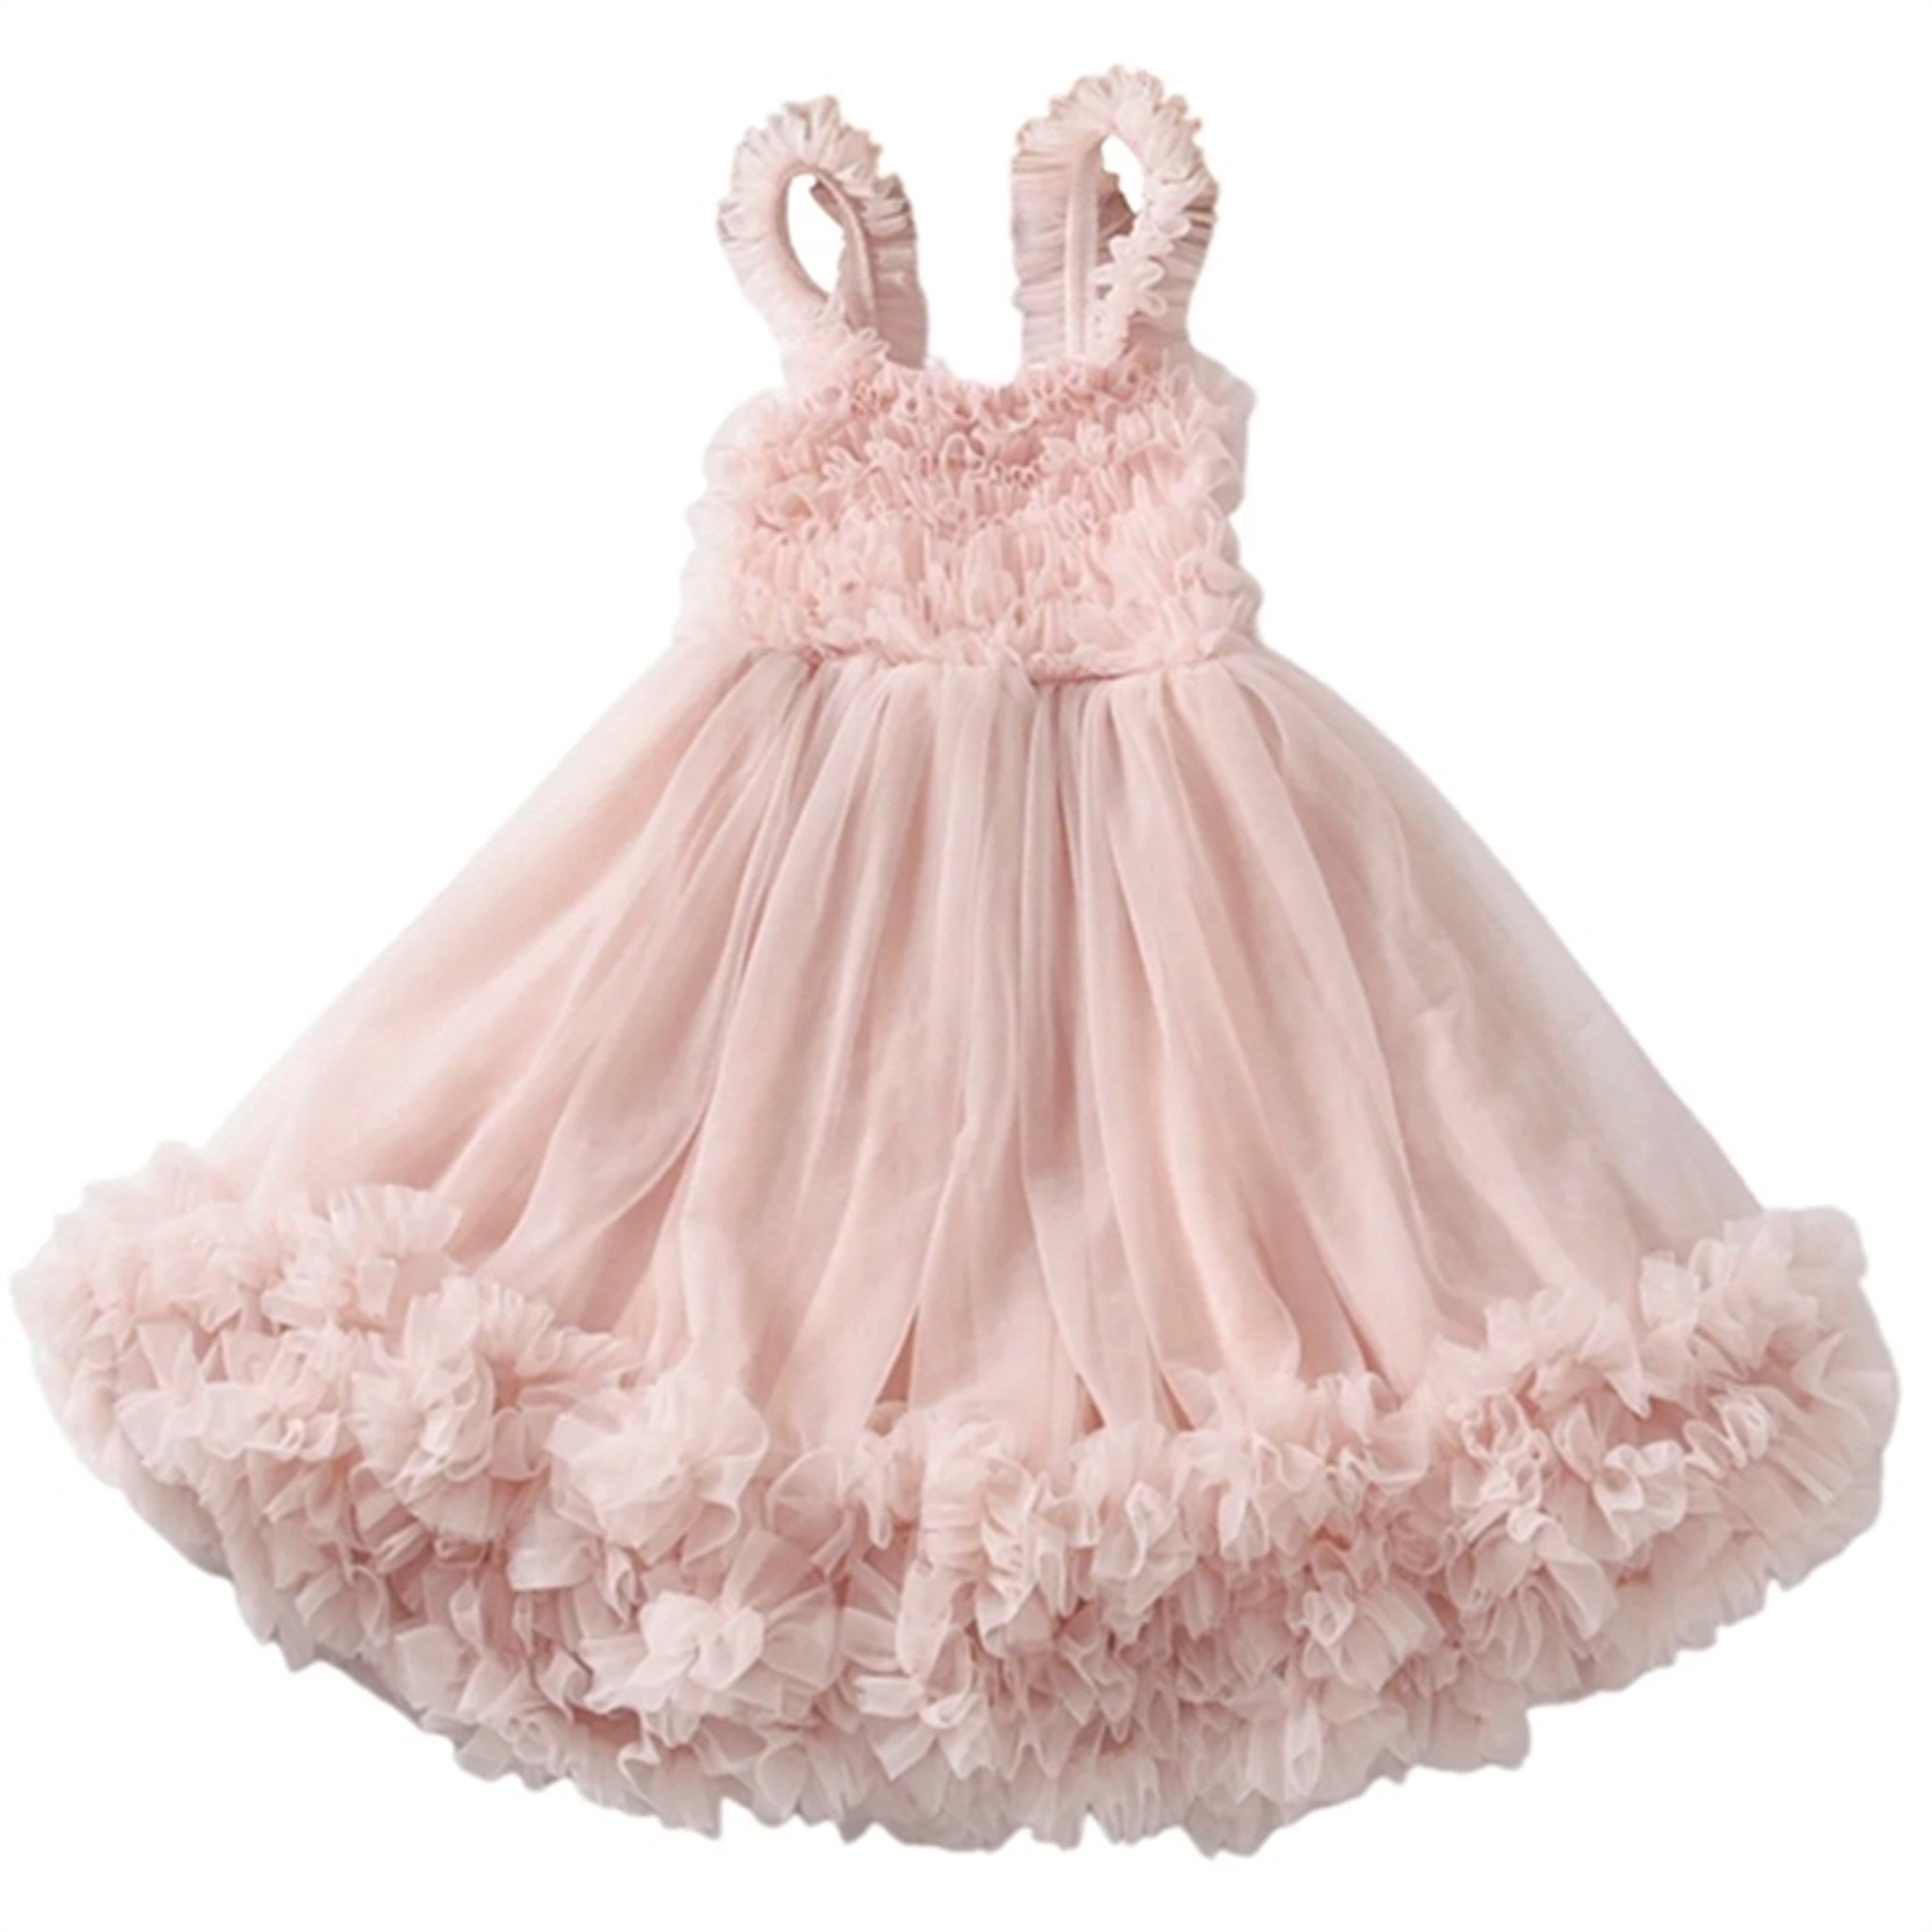 Dolly By Le Petit Tom Petti Klänning Ballet Pink